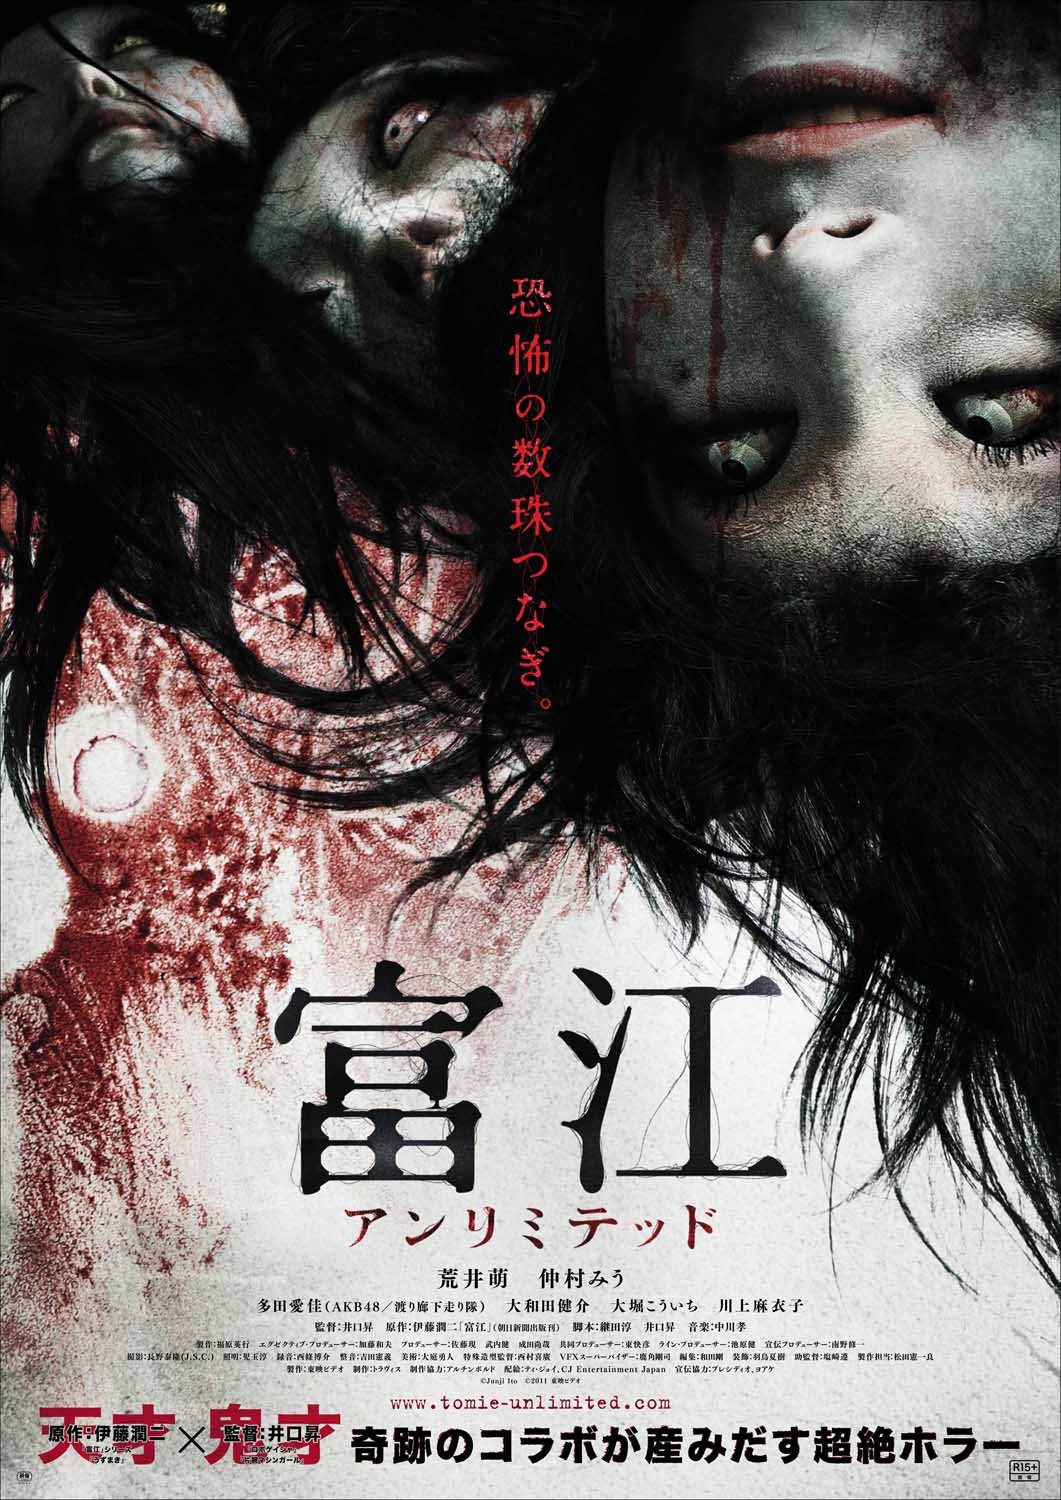 Extra Large Movie Poster Image for Tomie: Unlimited 